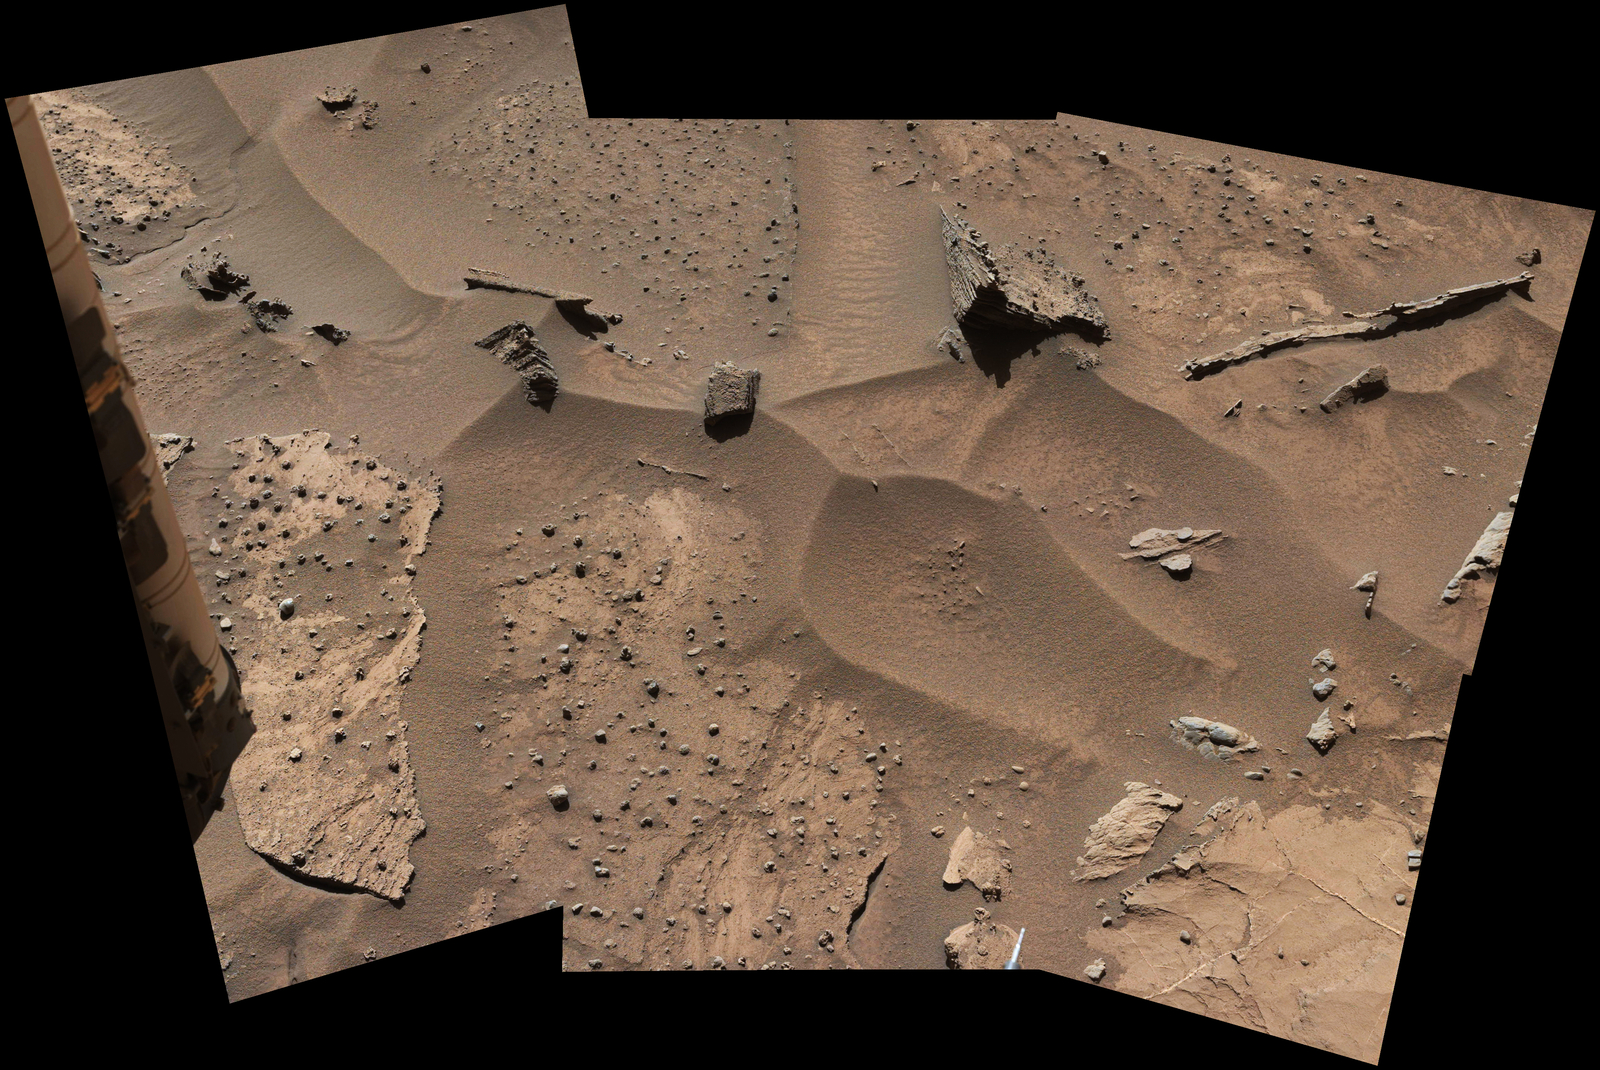 Patches of Martian sandstone visible in the lower-left and upper portions of this view from the Mast Camera (Mastcam) of NASA's Curiosity Mars rover have a knobbly texture due to nodules apparently more resistant to erosion than the host rock in which some are still embedded.